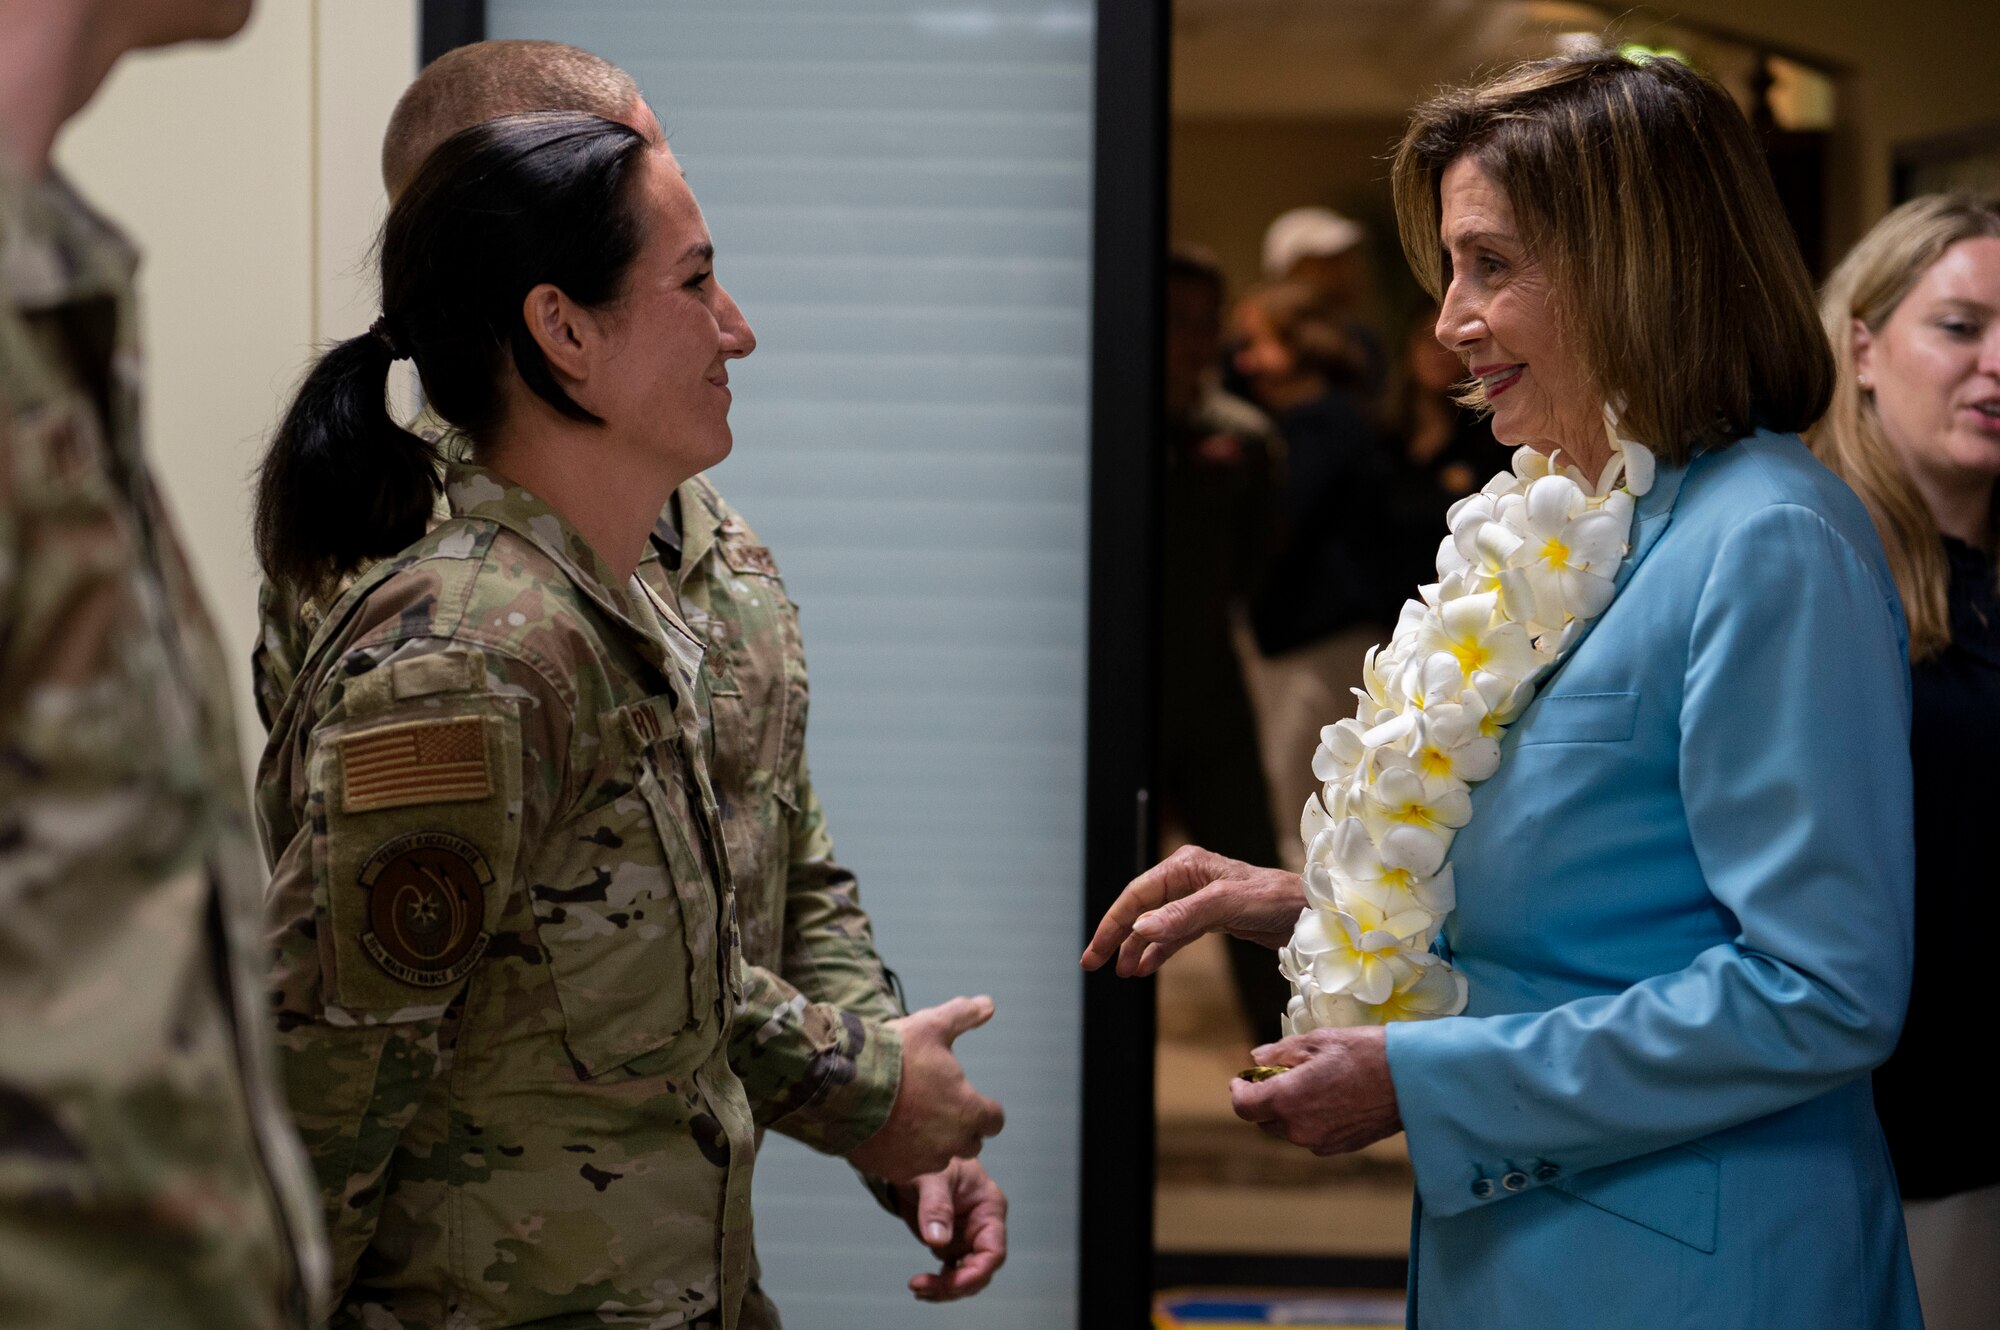 U.S. Air Force Staff Sgt. Samaerah Bryan, 36th Aircraft Maintenance Squadron aircraft structural maintenance shift lead, receives a coin from Speaker of the U.S. House of Representatives Nancy Pelosi at Andersen Air Force Base, Guam, July 31, 2022. Pelosi had the opportunity to recognize outstanding performers during her visit. (U.S. Air Force photo by Staff Sgt. Suzie Plotnikov)